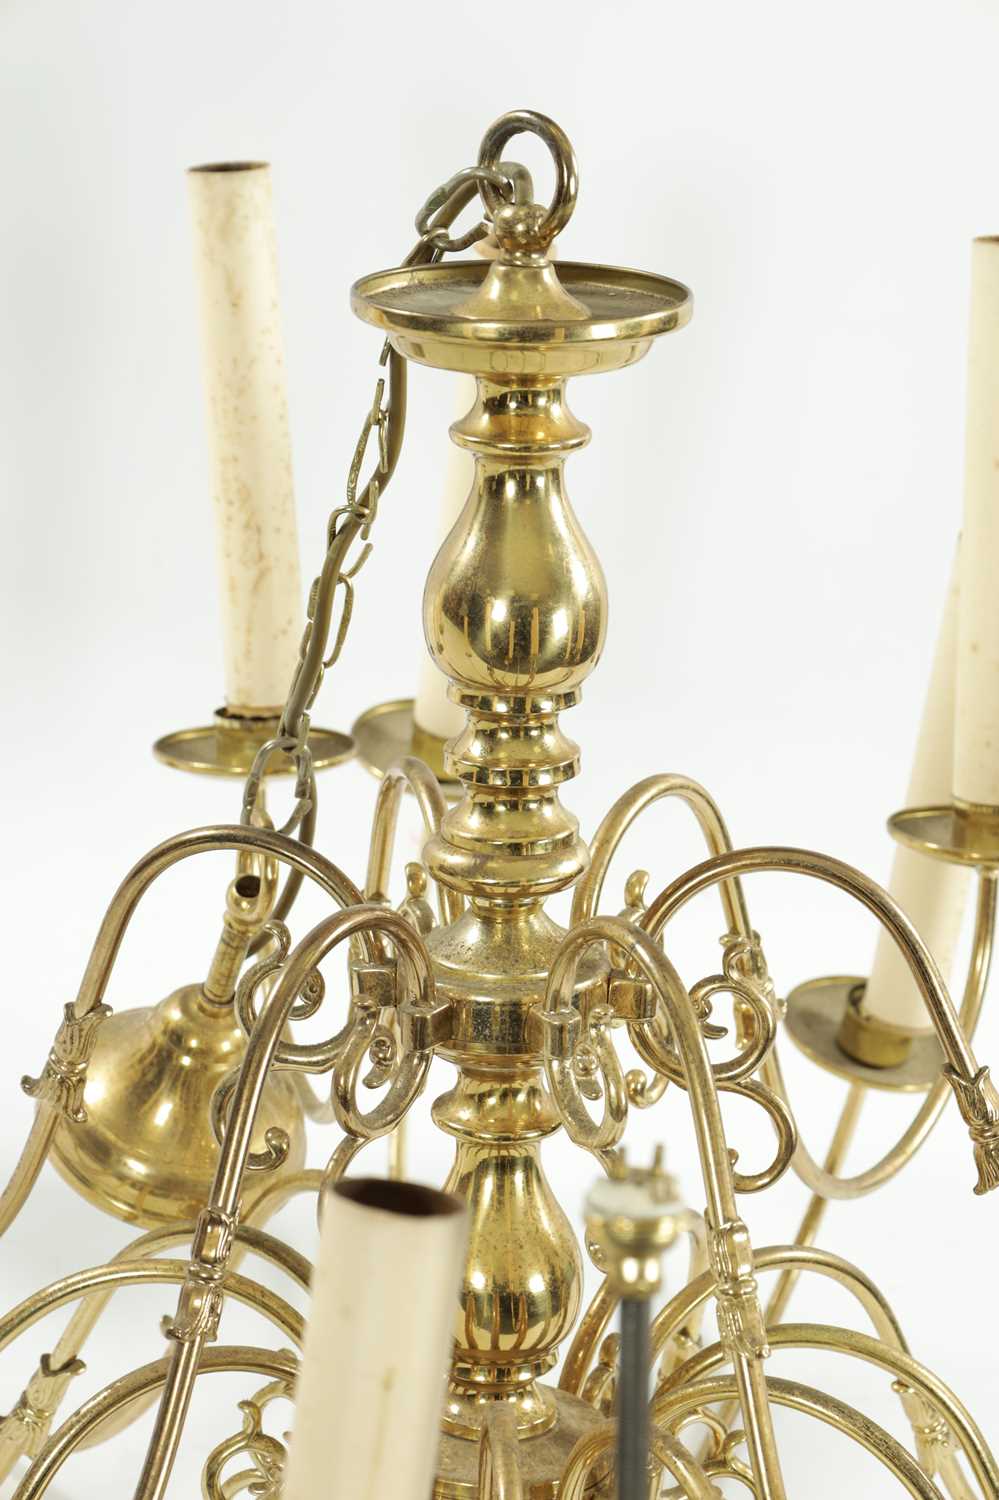 A LARGE 20TH CENTURY BRASS HANGING LIGHT - Image 6 of 7